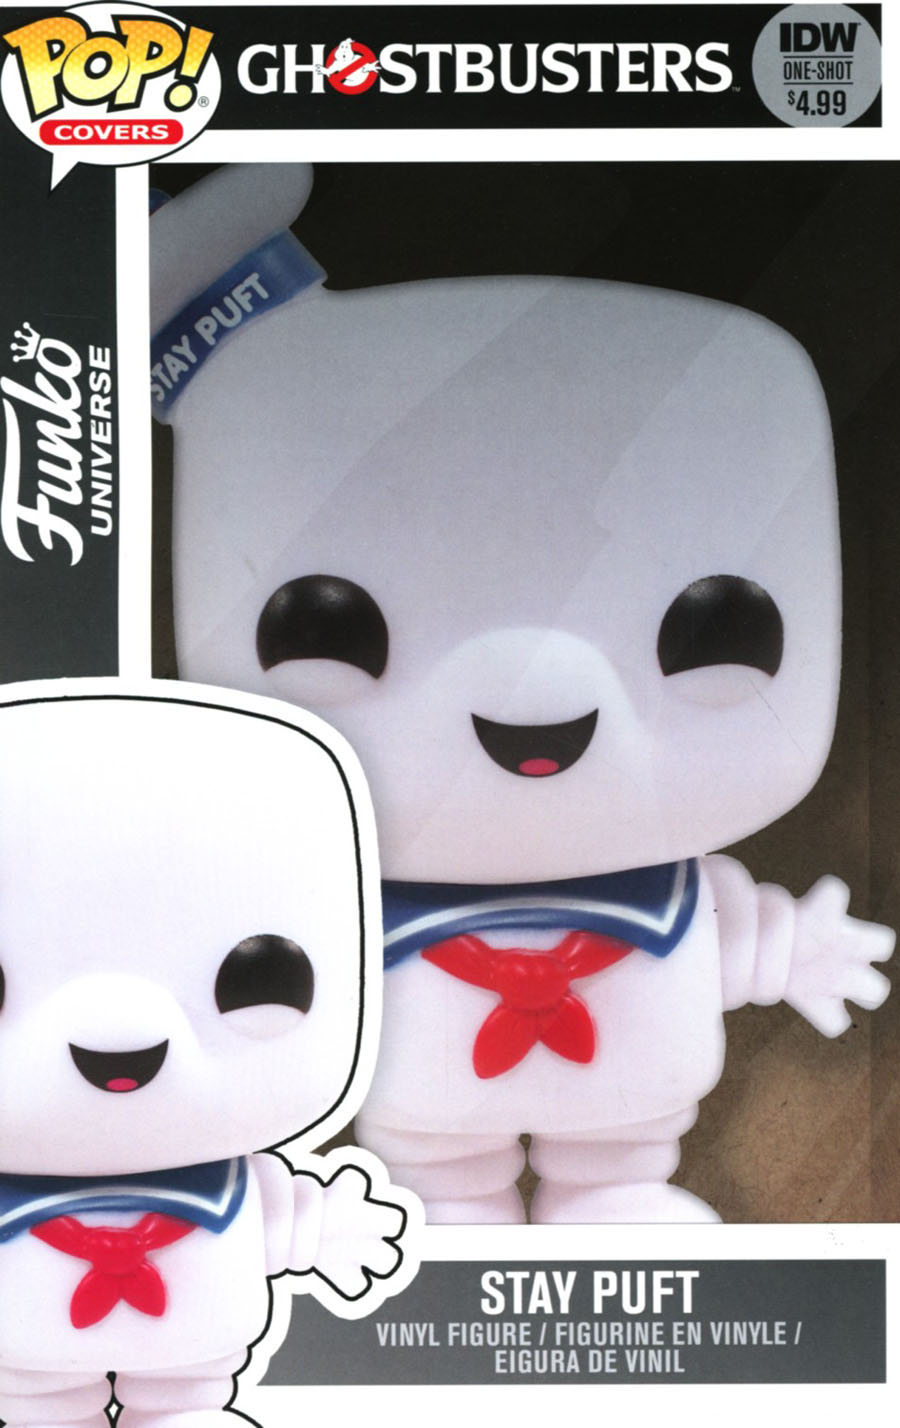 Ghostbusters Funko Universe Cover B Variant Funko Toy Subscription Cover